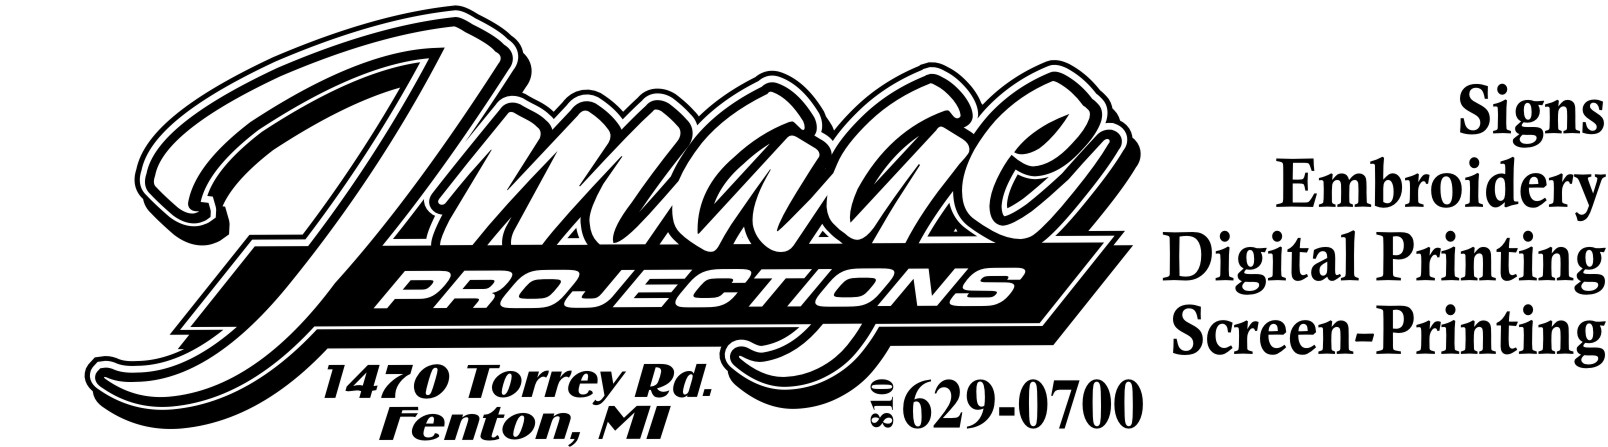 Image Projections, Inc.'s Logo